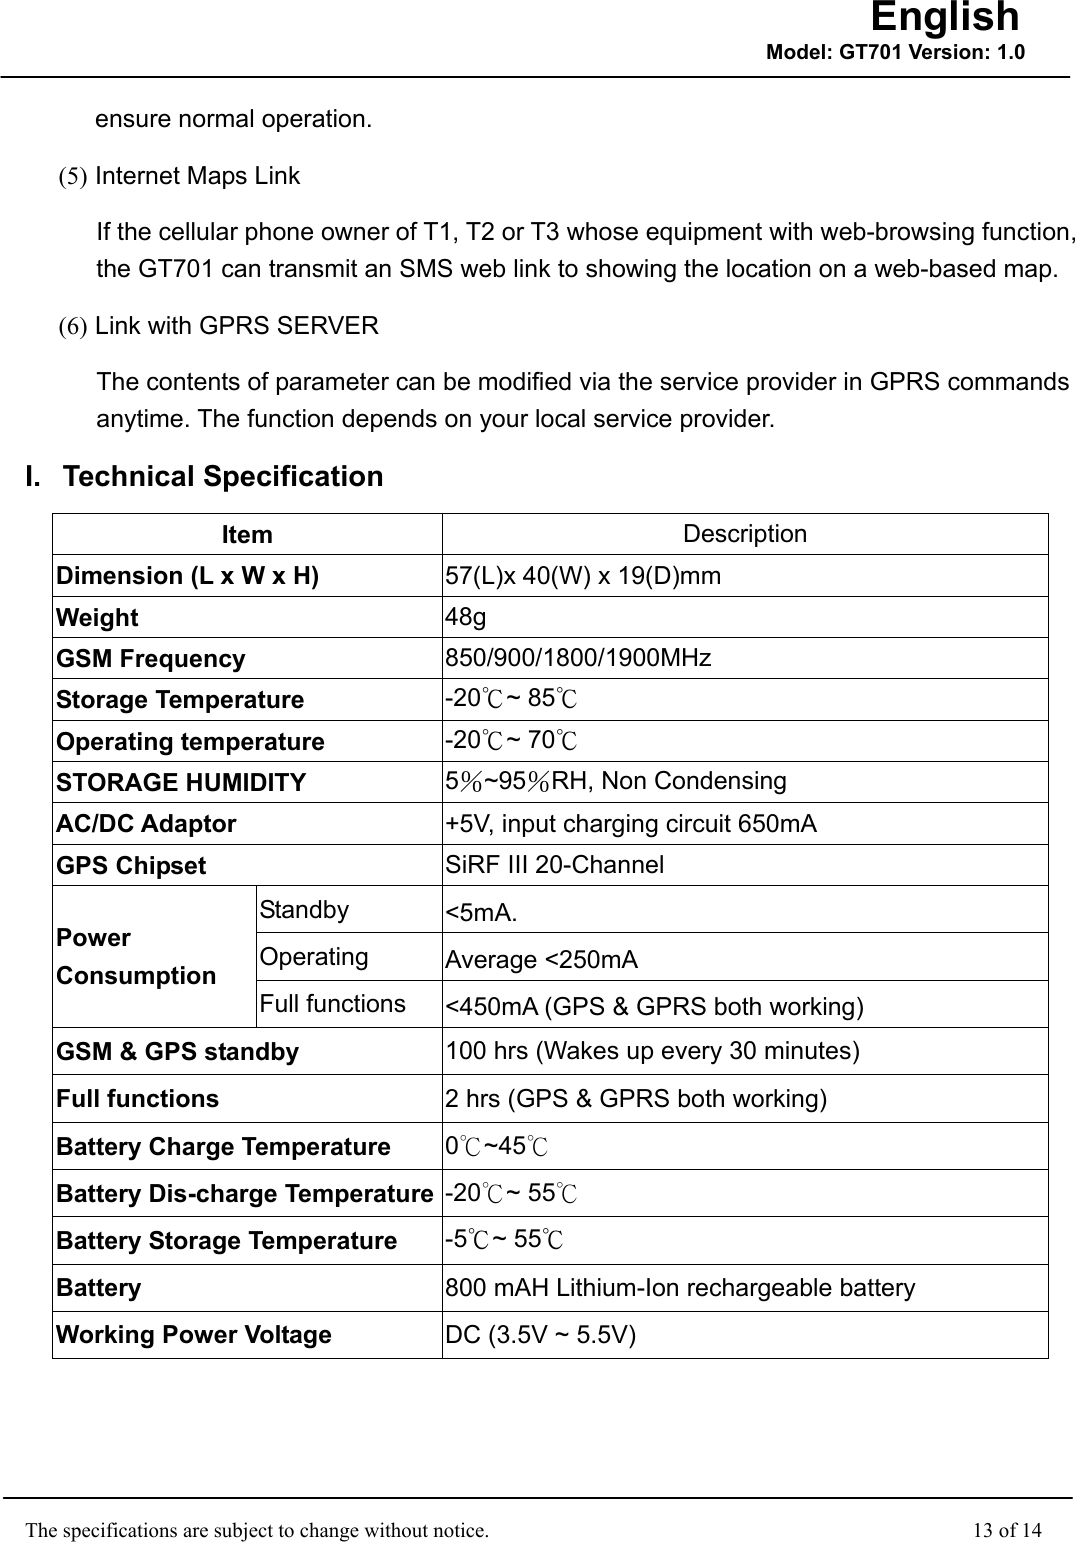                                                    The specifications are subject to change without notice.                                              13 of 14 English Model: GT701 Version: 1.0ensure normal operation. (5) Internet Maps Link If the cellular phone owner of T1, T2 or T3 whose equipment with web-browsing function, the GT701 can transmit an SMS web link to showing the location on a web-based map. (6) Link with GPRS SERVER The contents of parameter can be modified via the service provider in GPRS commands anytime. The function depends on your local service provider. I. Technical Specification Item  Description Dimension (L x W x H)  57(L)x 40(W) x 19(D)mm Weight  48g GSM Frequency  850/900/1800/1900MHz  Storage Temperature  -20℃~ 85℃ Operating temperature  -20℃~ 70℃ STORAGE HUMIDITY  5％~95％RH, Non Condensing AC/DC Adaptor  +5V, input charging circuit 650mA GPS Chipset  SiRF III 20-Channel Standby  &lt;5mA. Operating  Average &lt;250mA Power Consumption  Full functions  &lt;450mA (GPS &amp; GPRS both working) GSM &amp; GPS standby  100 hrs (Wakes up every 30 minutes) Full functions  2 hrs (GPS &amp; GPRS both working) Battery Charge Temperature  0~45℃℃ Battery Dis-charge Temperature -20 ~ 55℃℃ Battery Storage Temperature  -5℃~ 55℃ Battery  800 mAH Lithium-Ion rechargeable battery Working Power Voltage  DC (3.5V ~ 5.5V) 